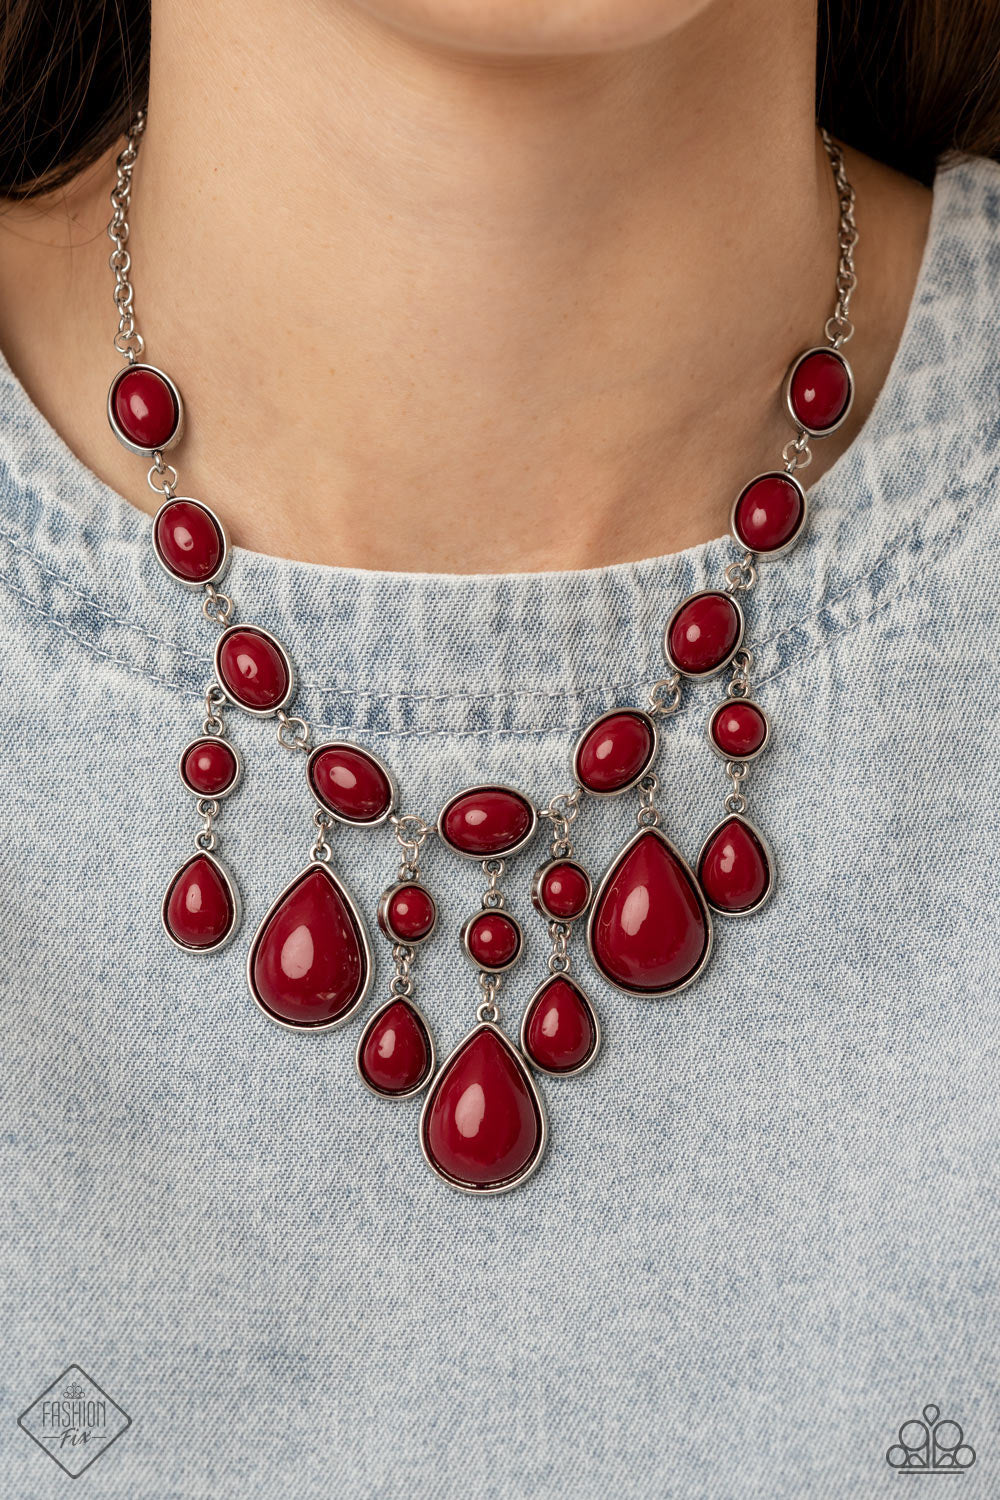 PRE-ORDER - Paparazzi Mediterranean Mystery - Red - Necklace & Earrings - Trend Blend / Fashion Fix Exclusive January 2022 - $5 Jewelry with Ashley Swint